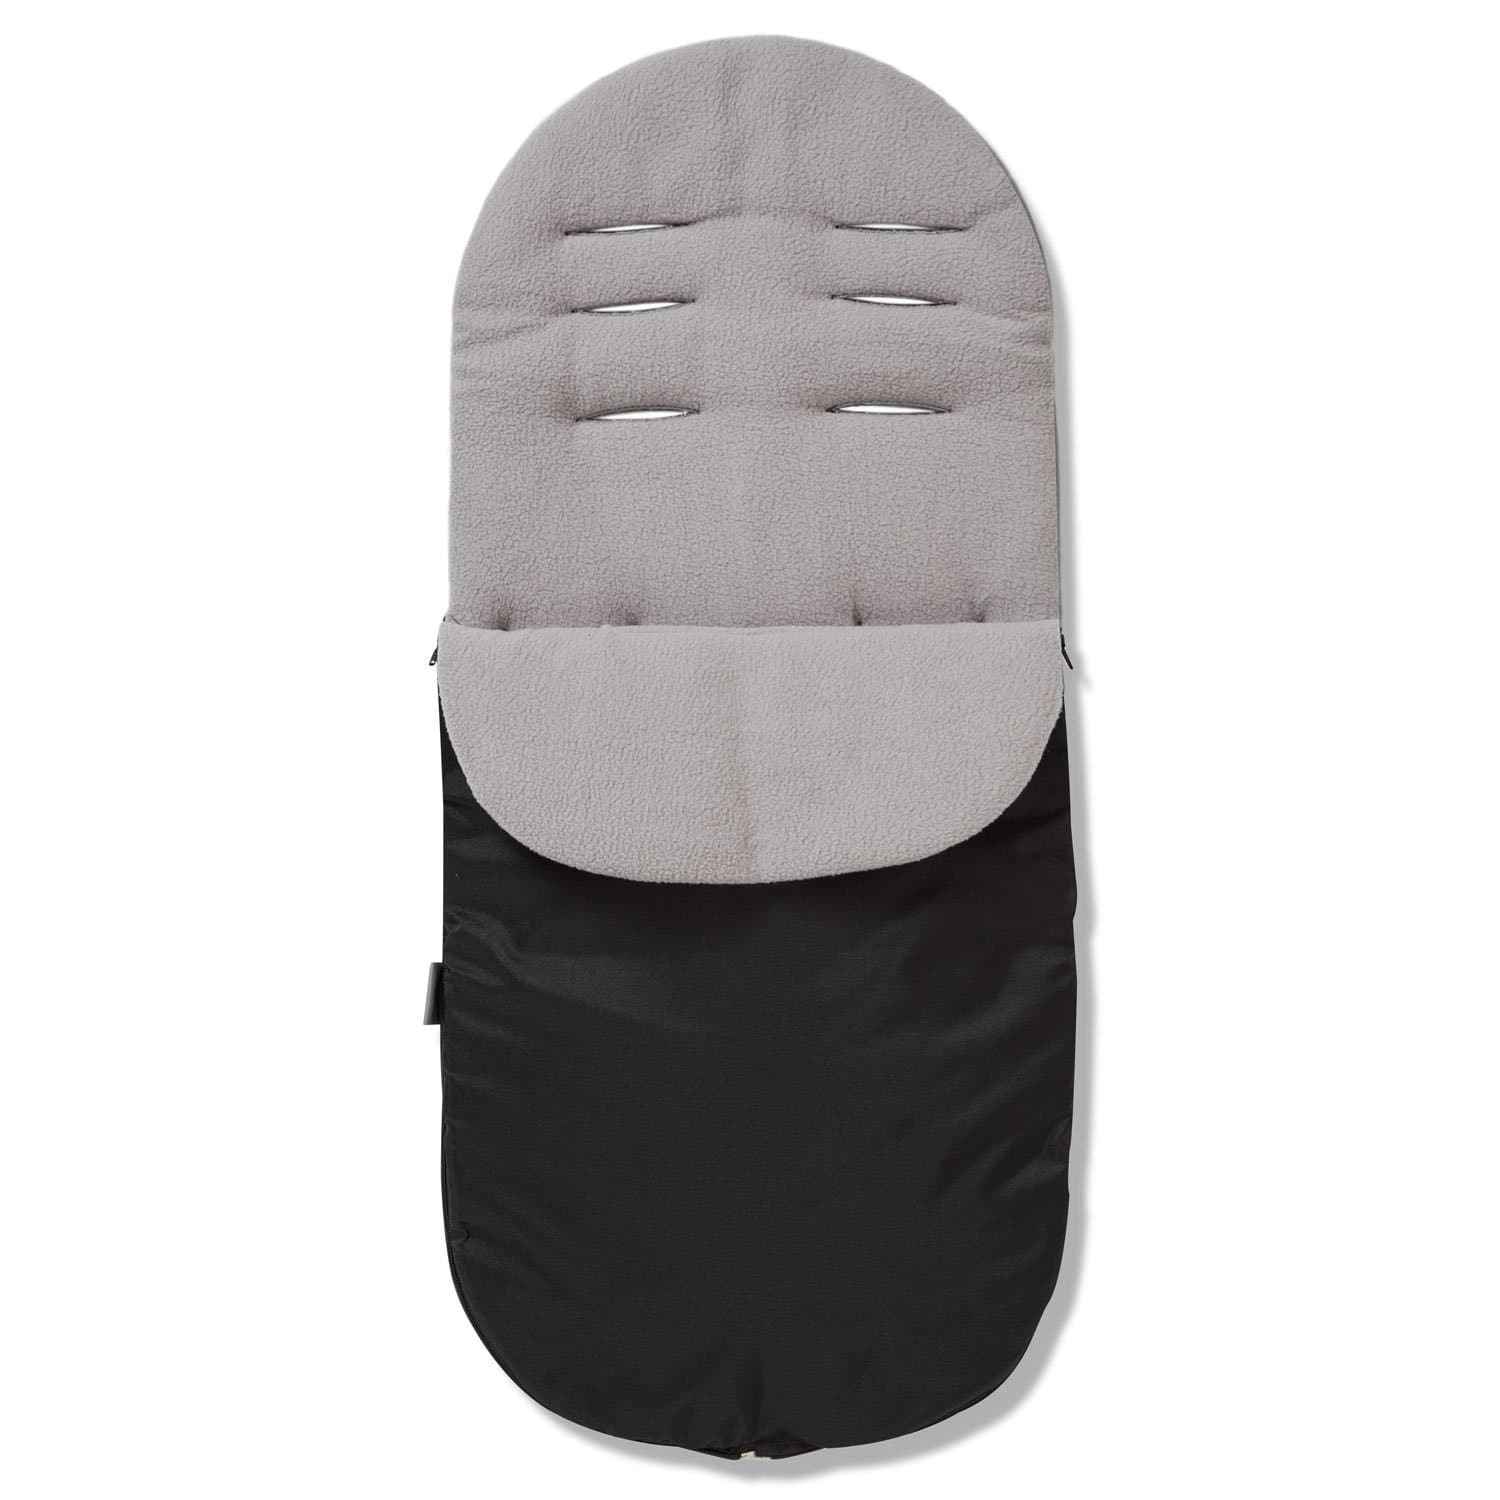 Footmuff / Cosy Toes Compatible with Graco - Grey / Fits All Models | For Your Little One